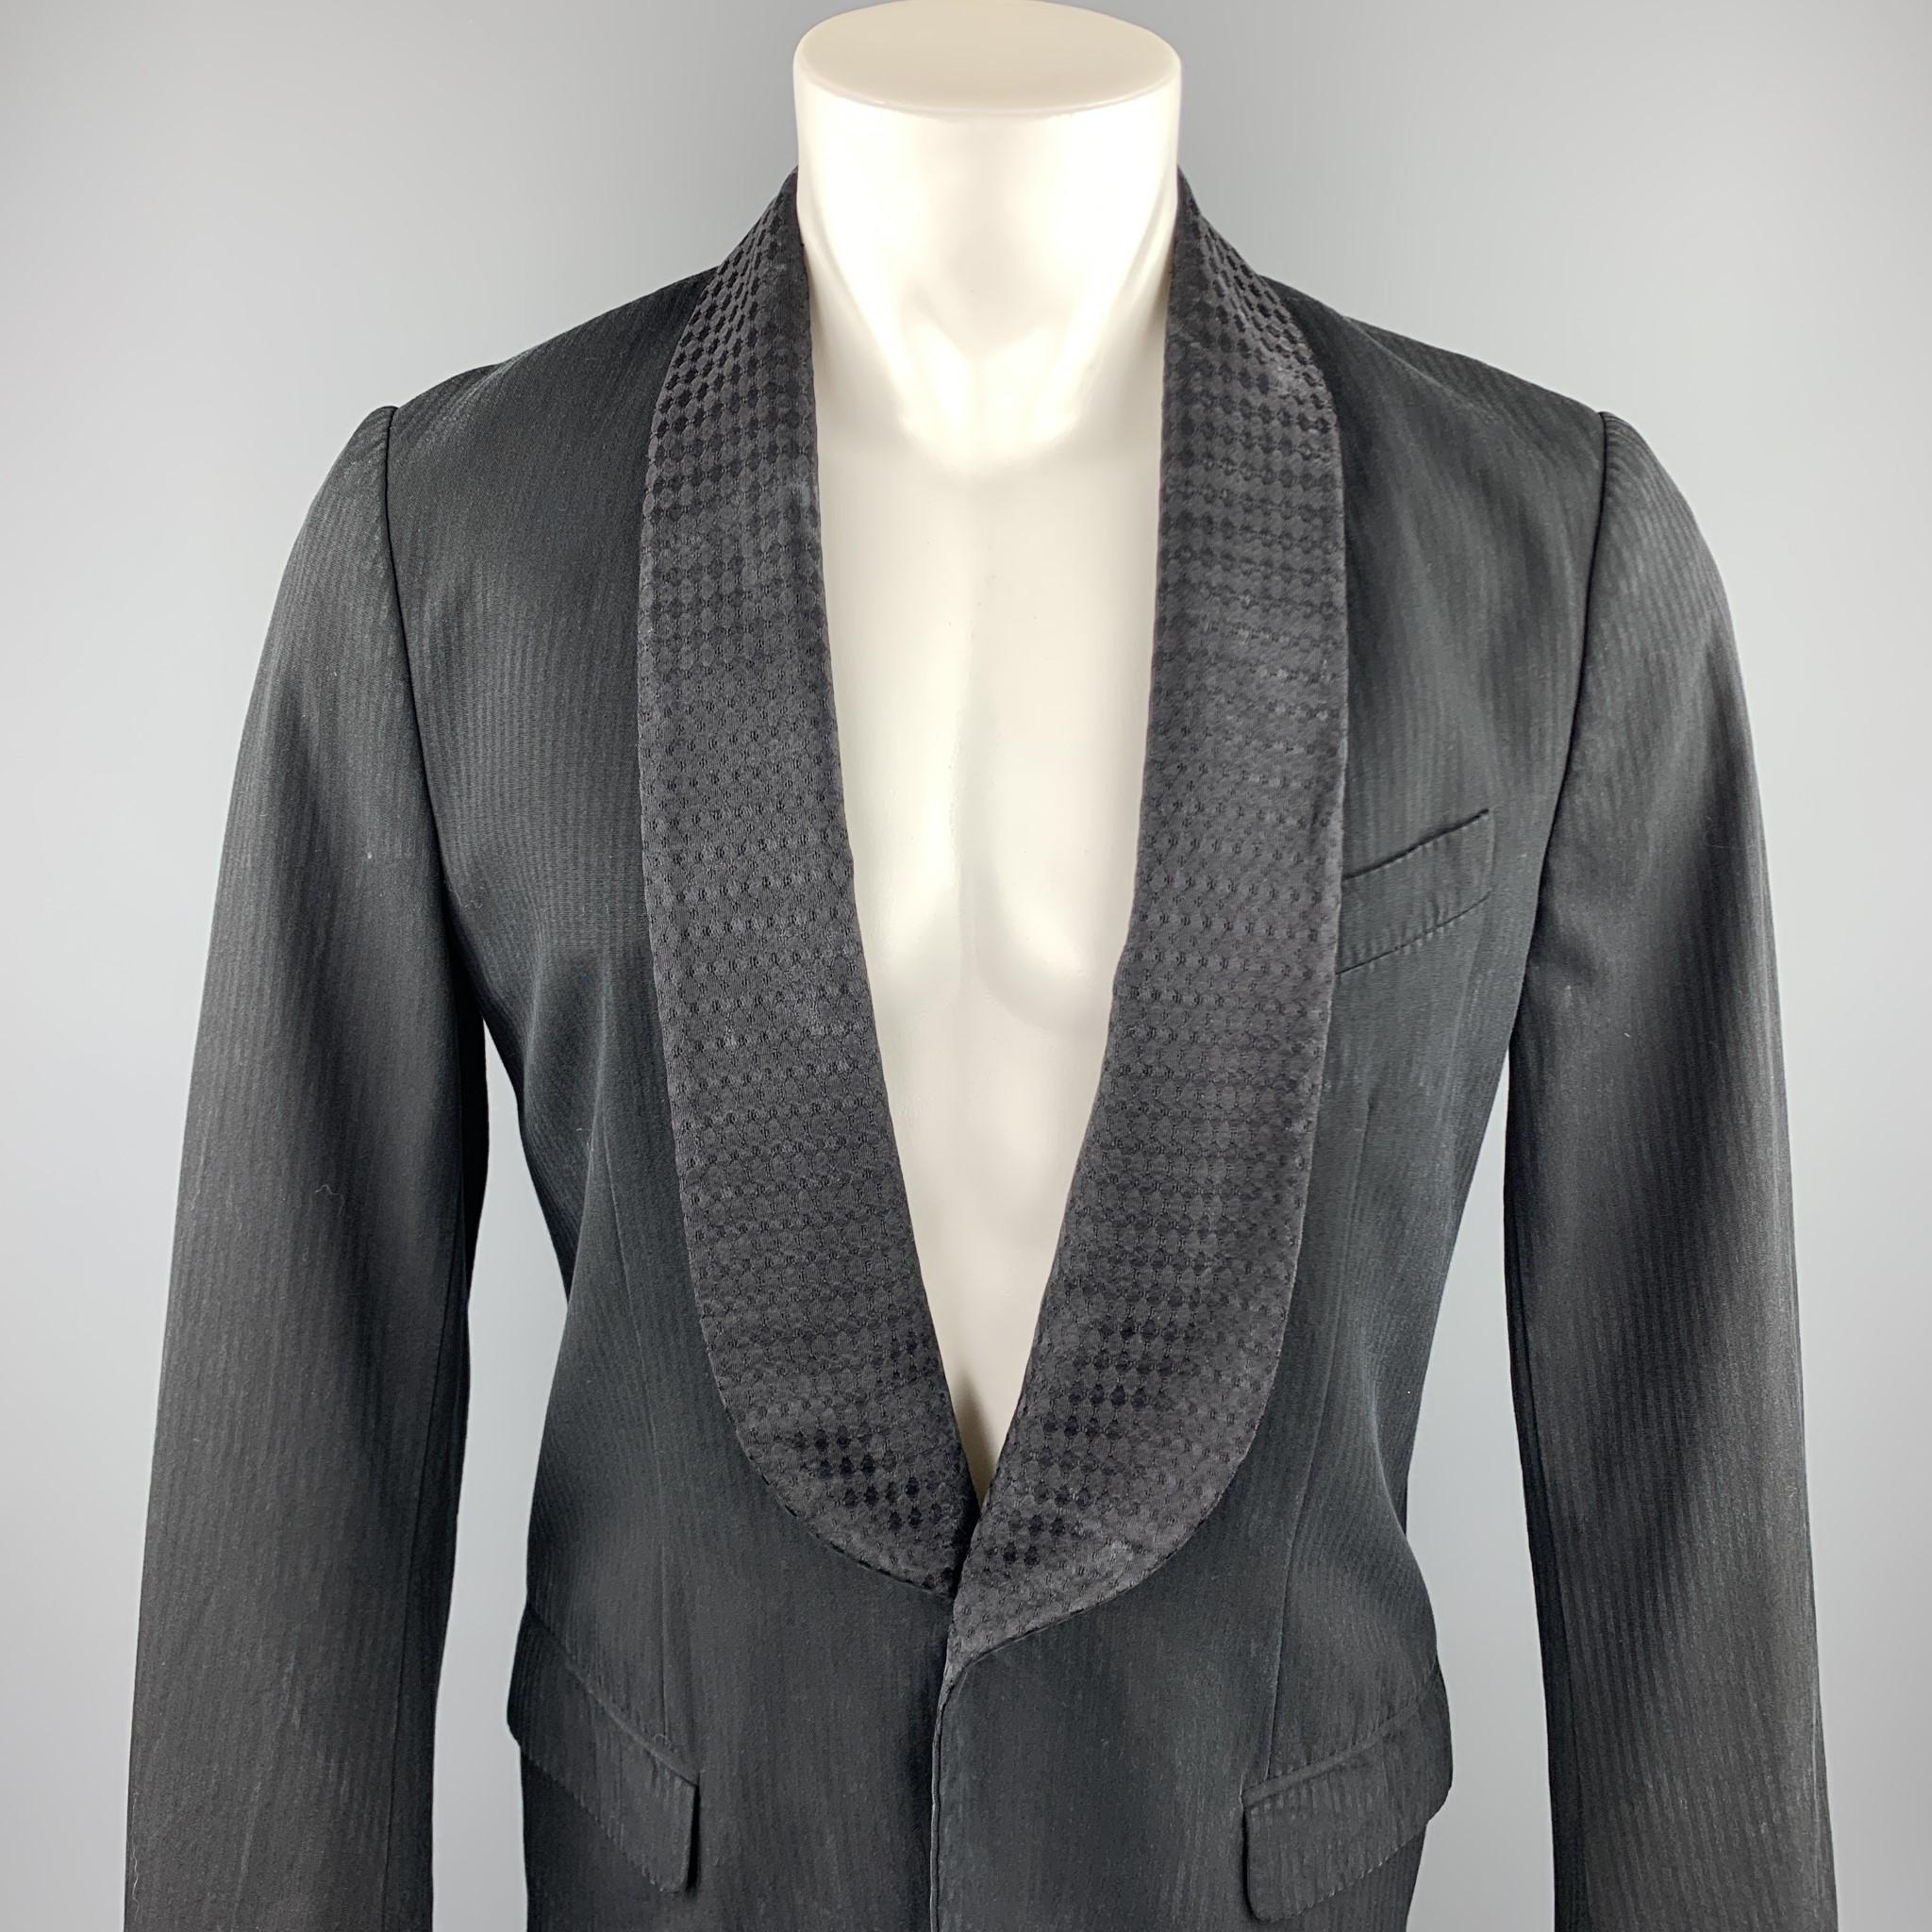 DRIES VAN NOTEN sport coat comes in a black on black stripe cotton / rayon featuring a shawl collar, flap pockets, and a single button closure. 

Very Good Pre-Owned Condition.
Marked: 46

Measurements:

Shoulder: 17 in. 
Chest: 38 in. 
Sleeve: 27.5